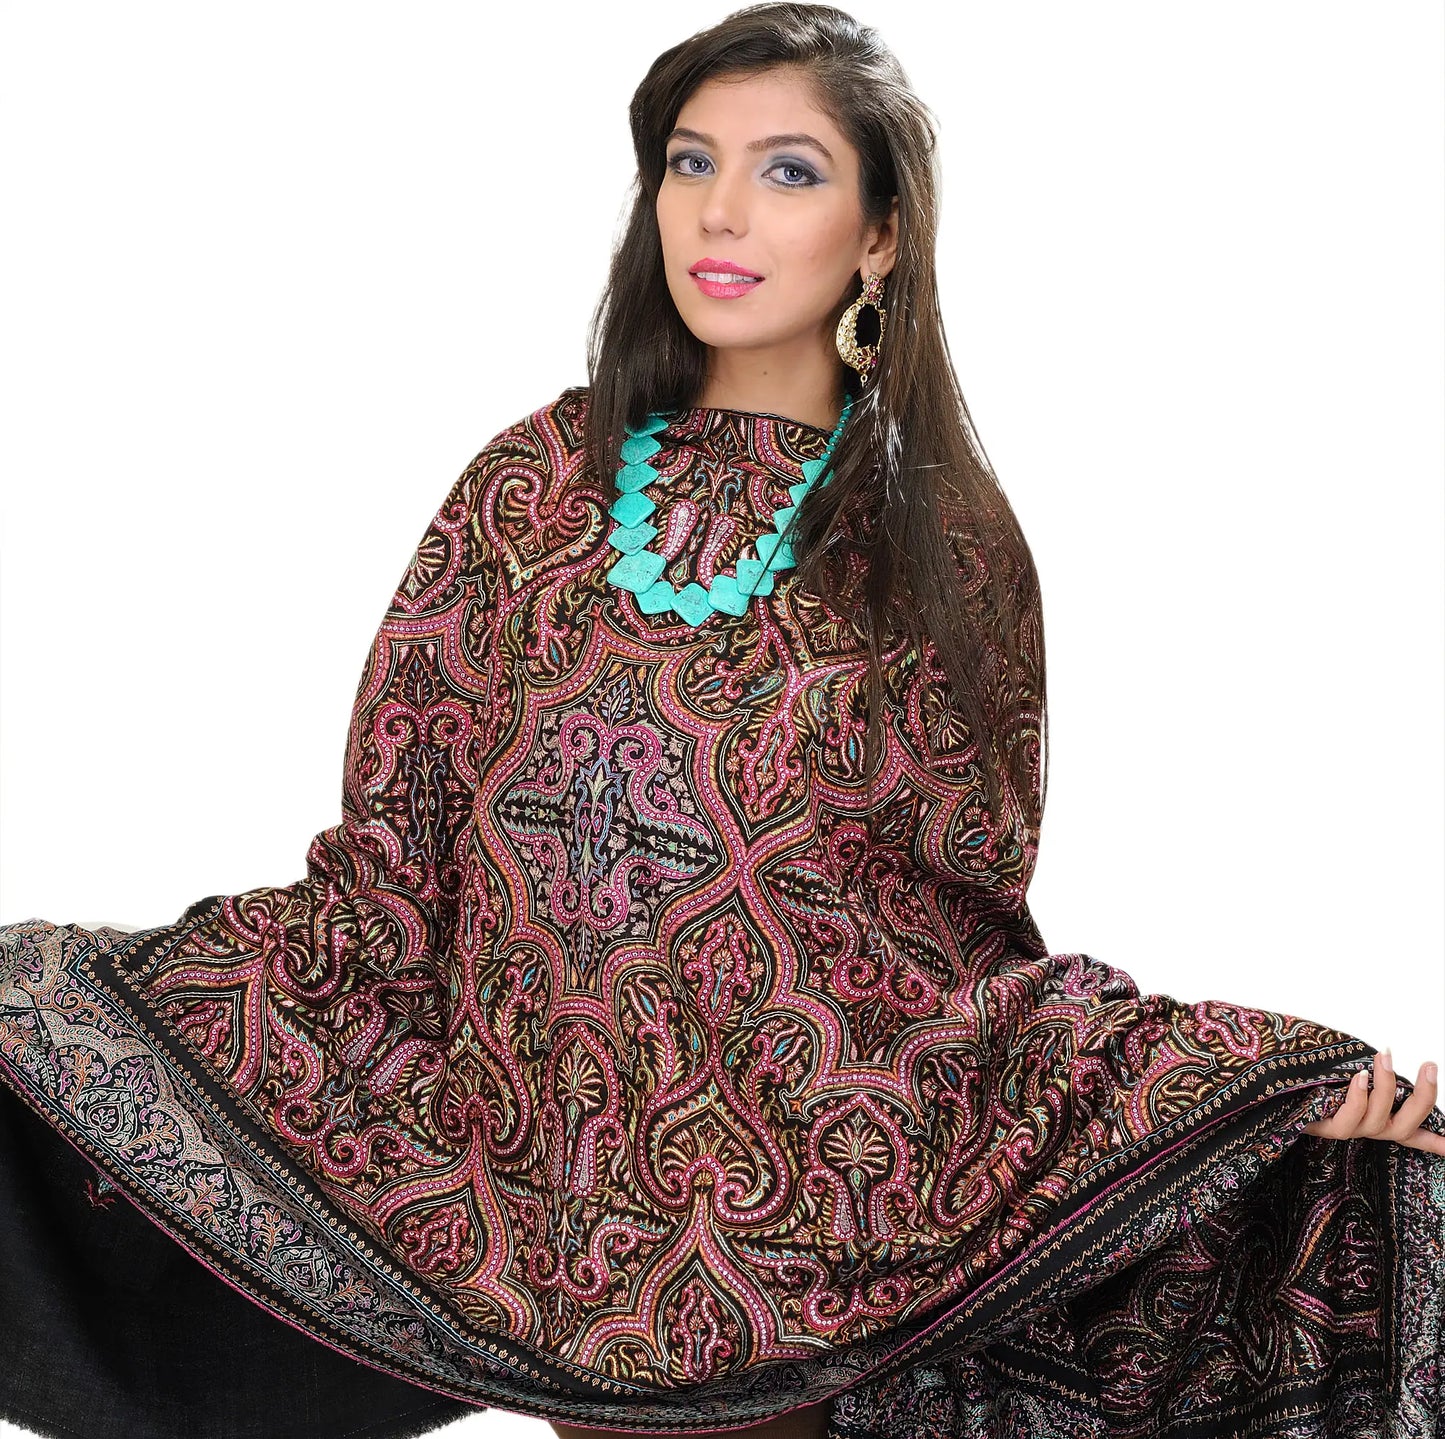 Jet-Black Pashmina Shawl with Indricate Needle Embroidery By Hand